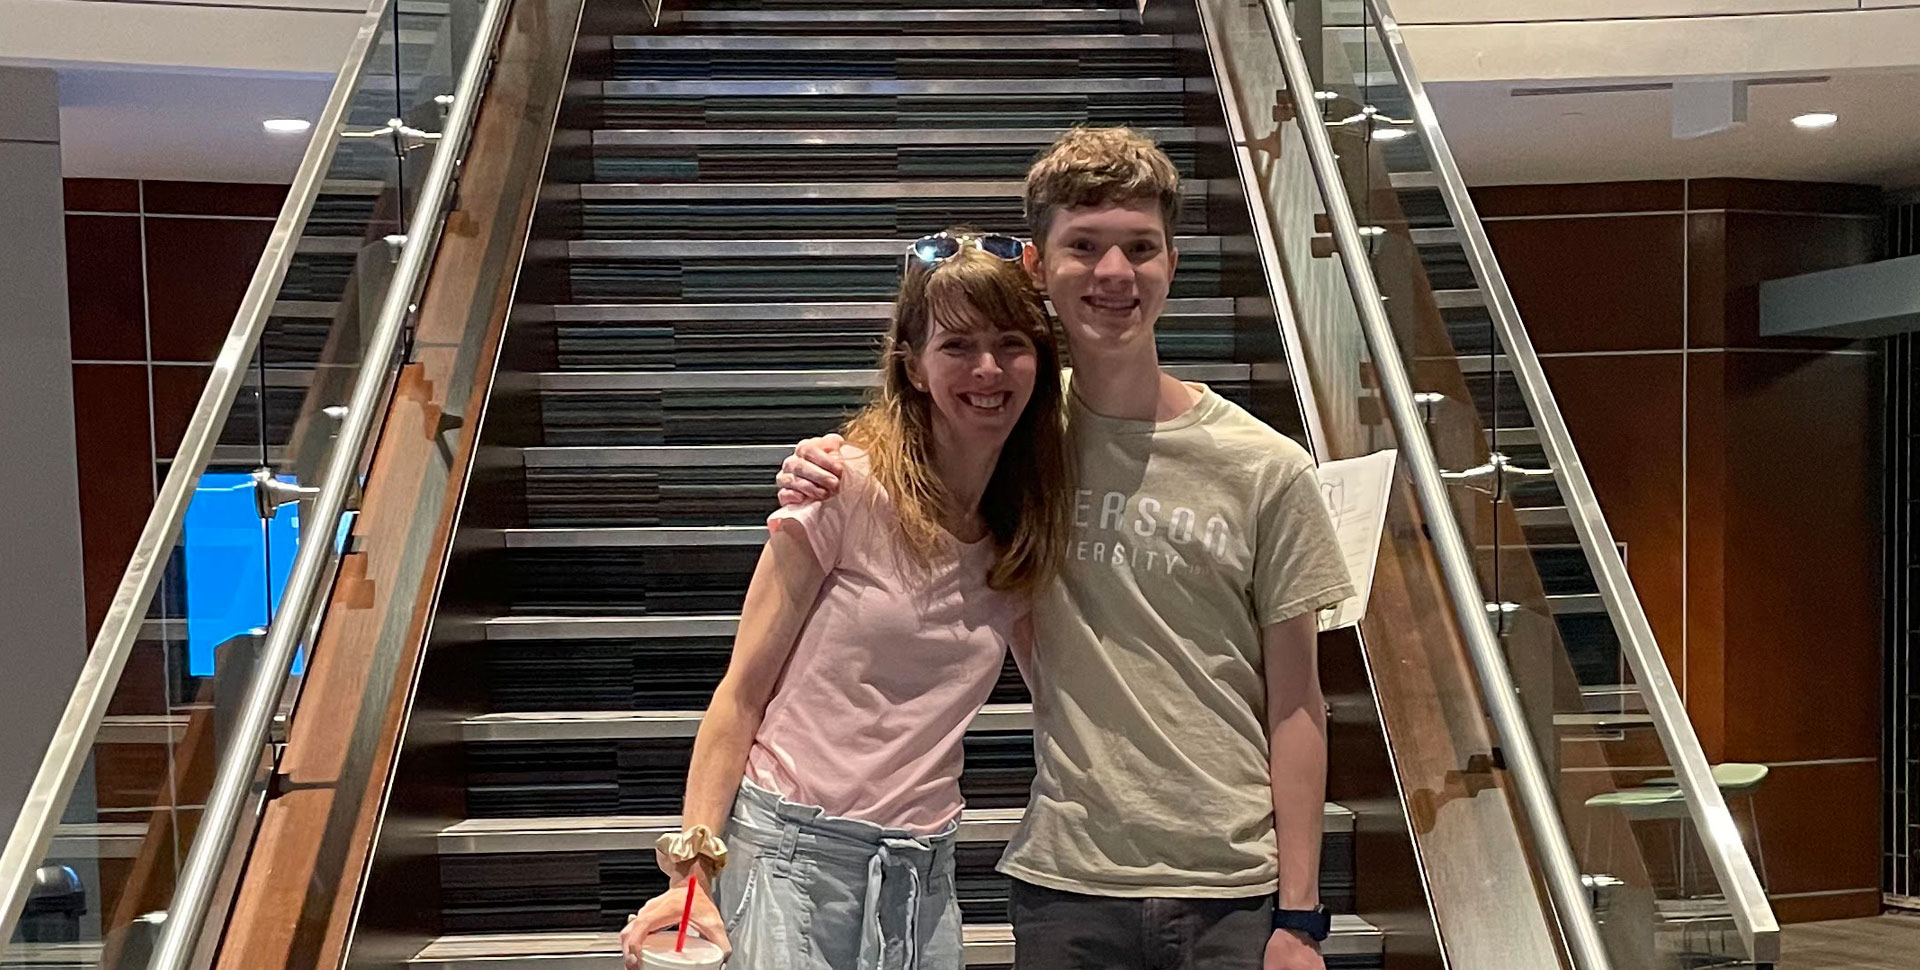 Mom and son at the bottom of student center stairs